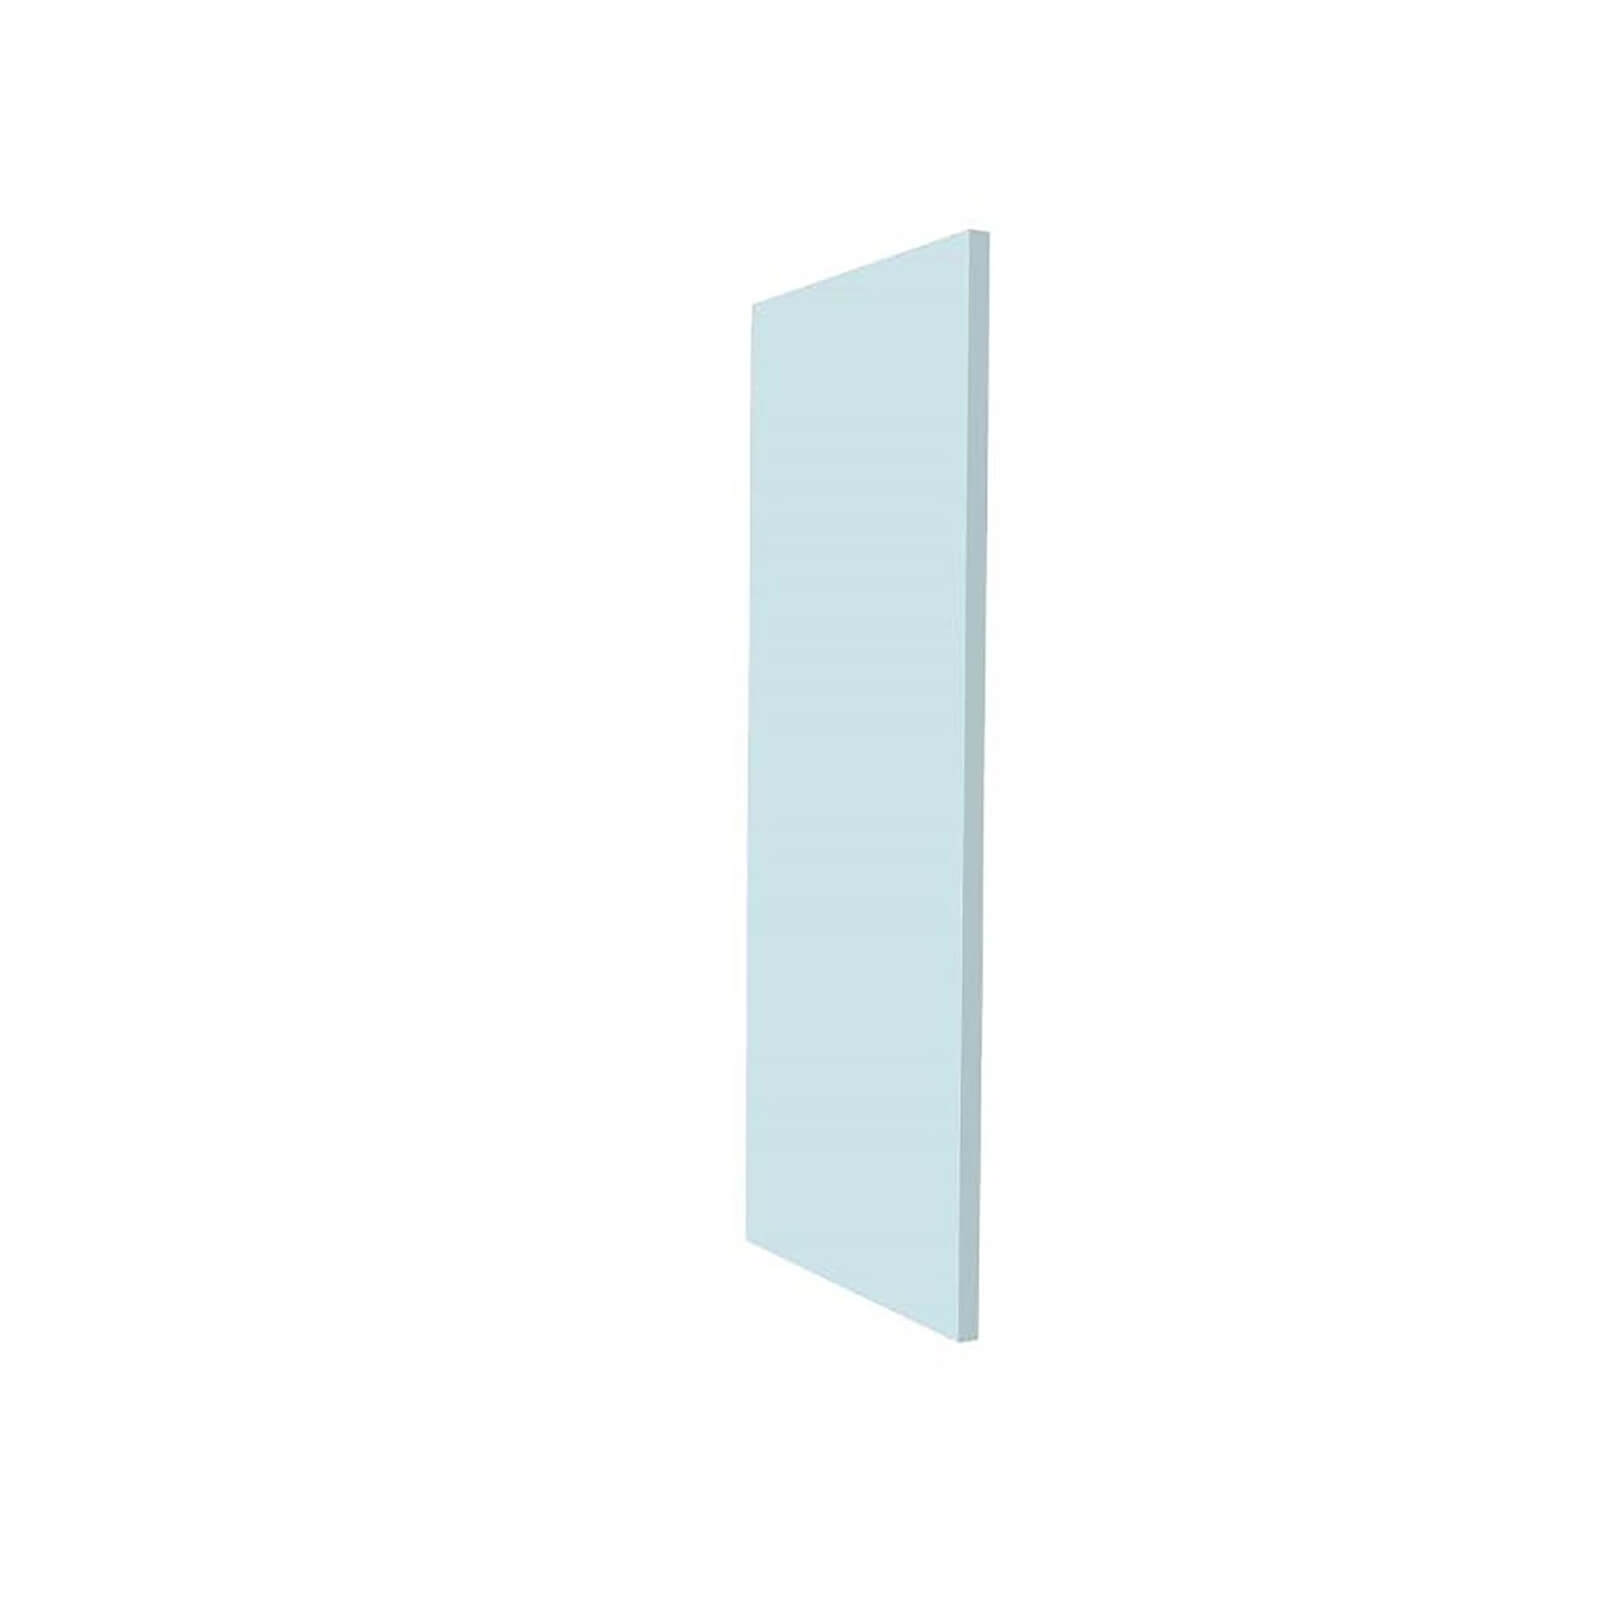 French Shaker Kitchen Clad on Wall Panel (H)752 x (W)343mm - Light Blue